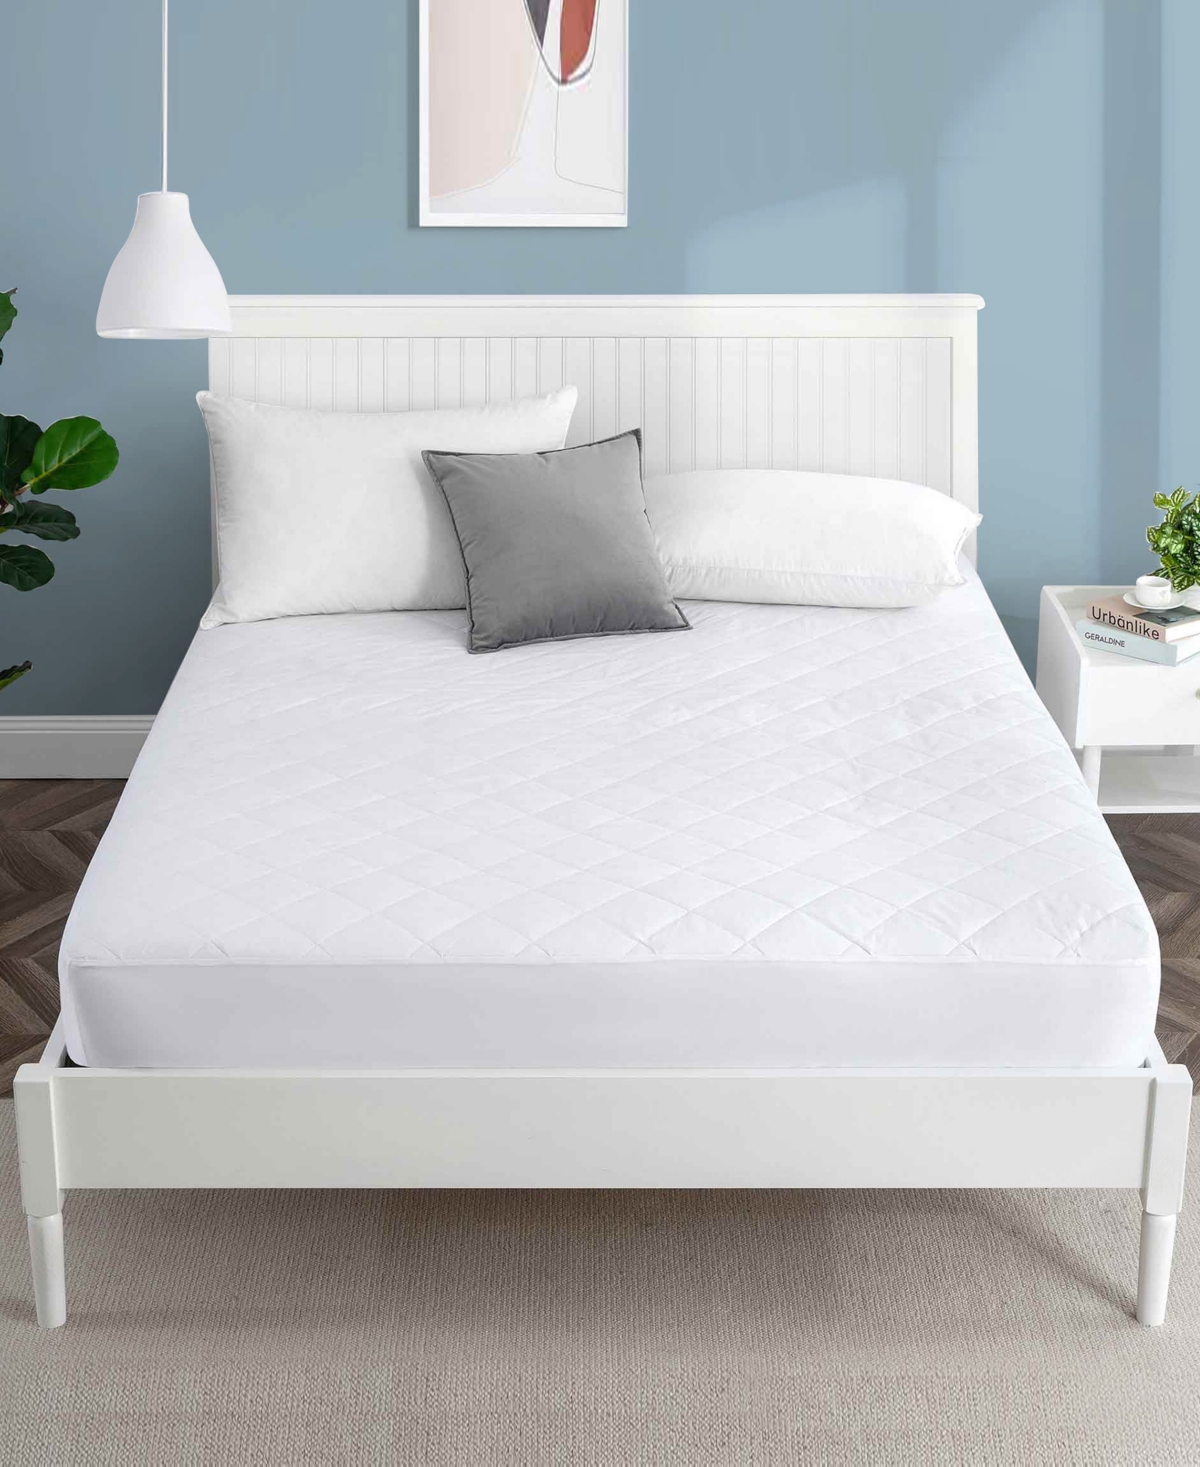 Unikome Breathable Cotton Square Quilted Fitted Mattress Pad, Full In White